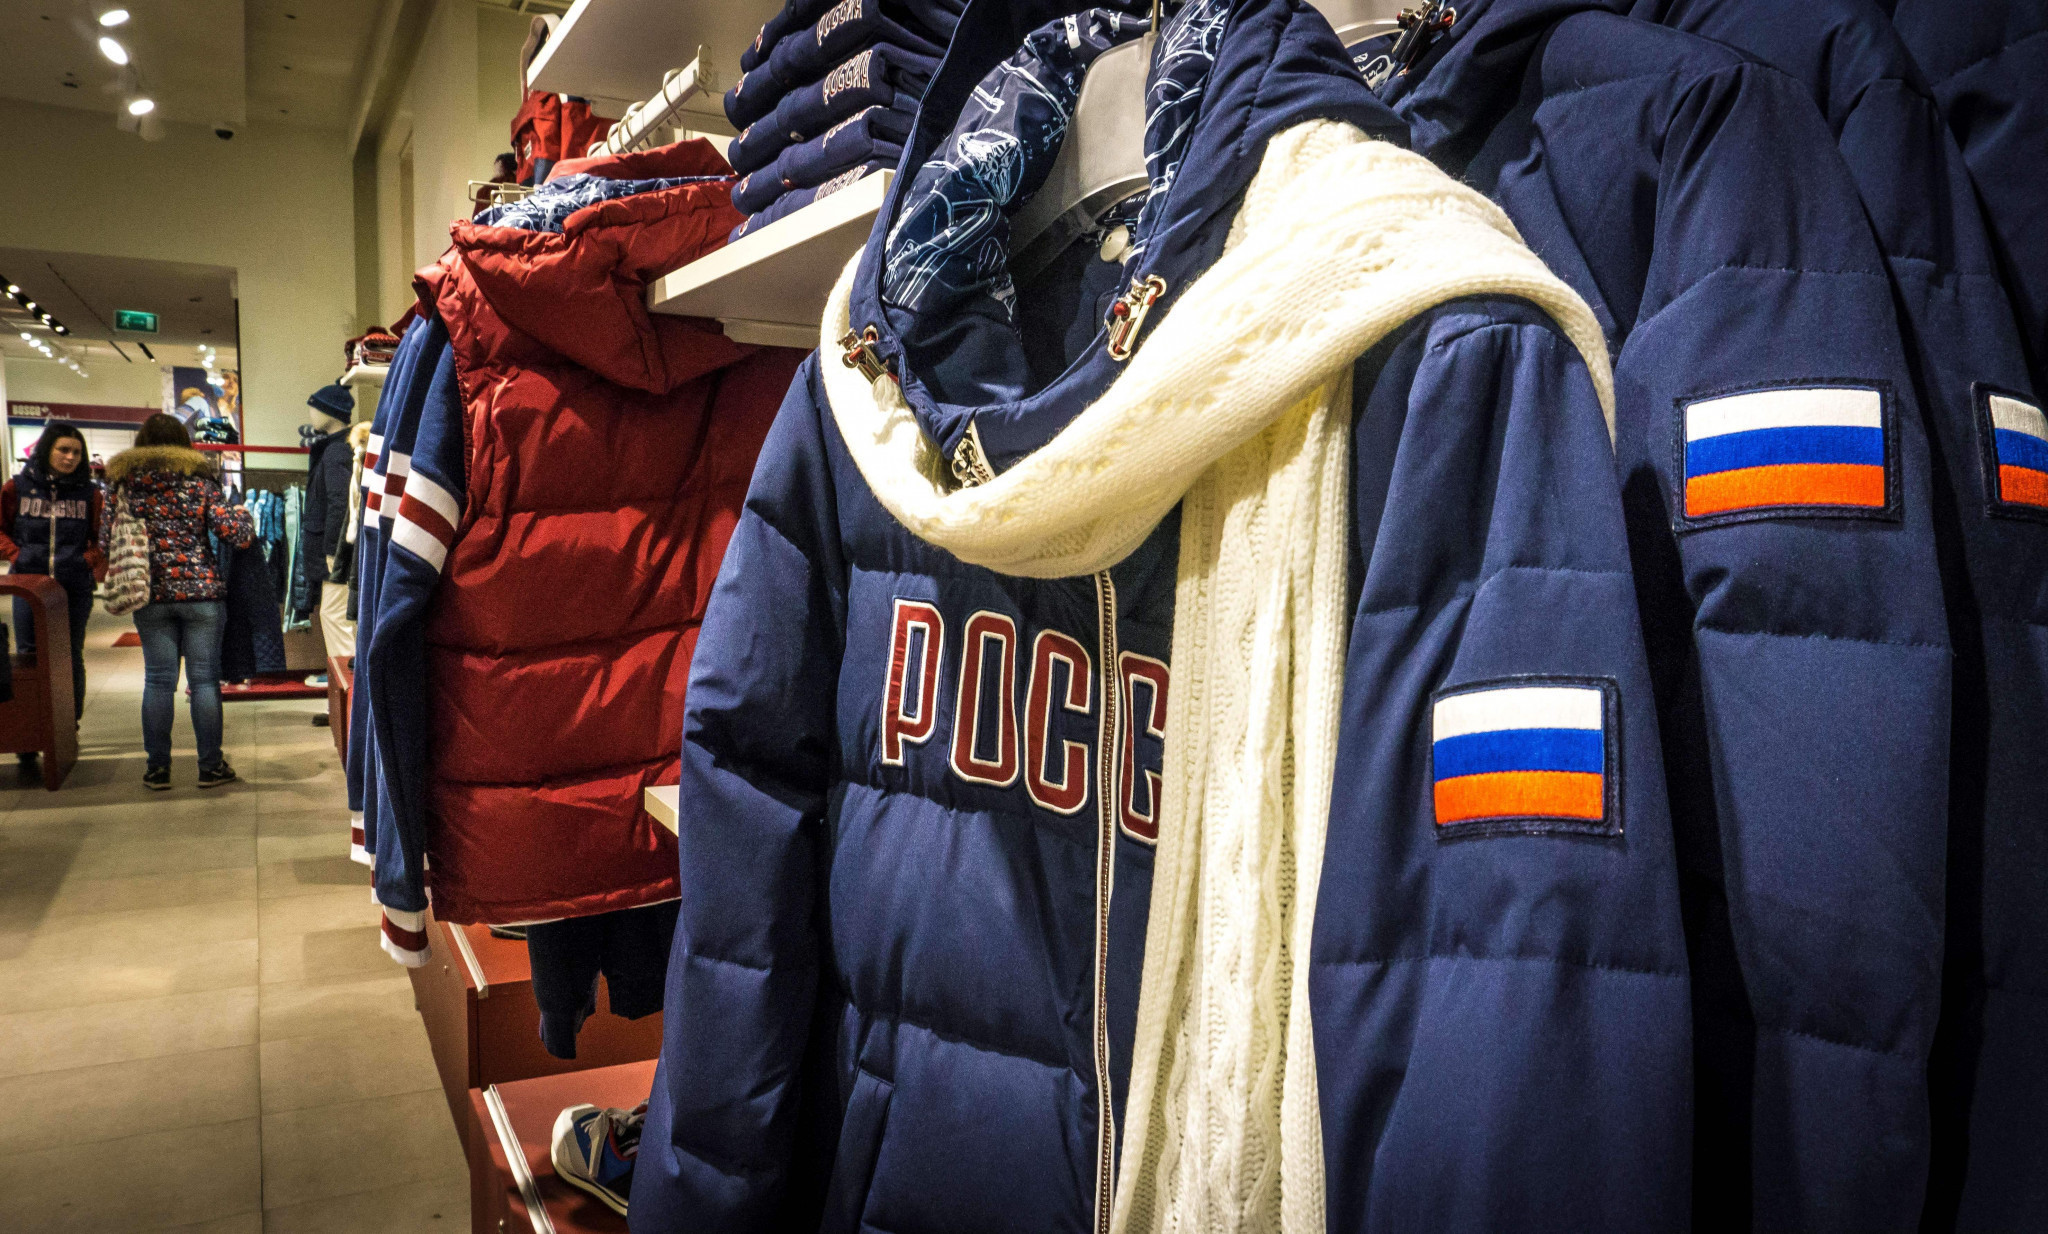 Bosco have been a long-term supplier of uniforms for Russian athletes at the Olympic Games ©Getty Images